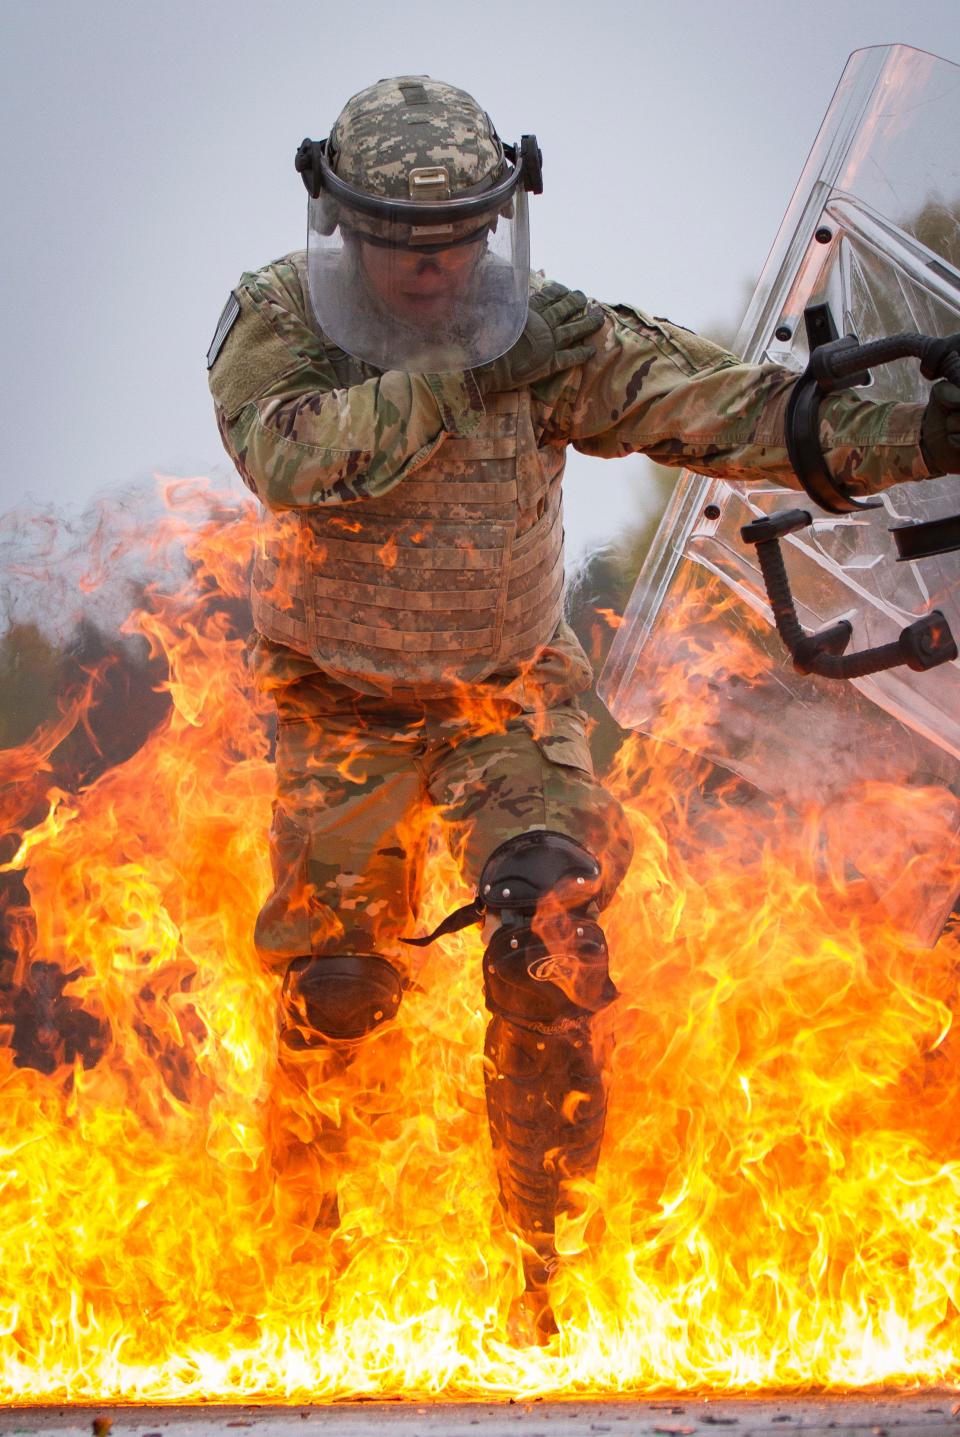 A photo of a man in riot gear batting away flames with a riot shield.